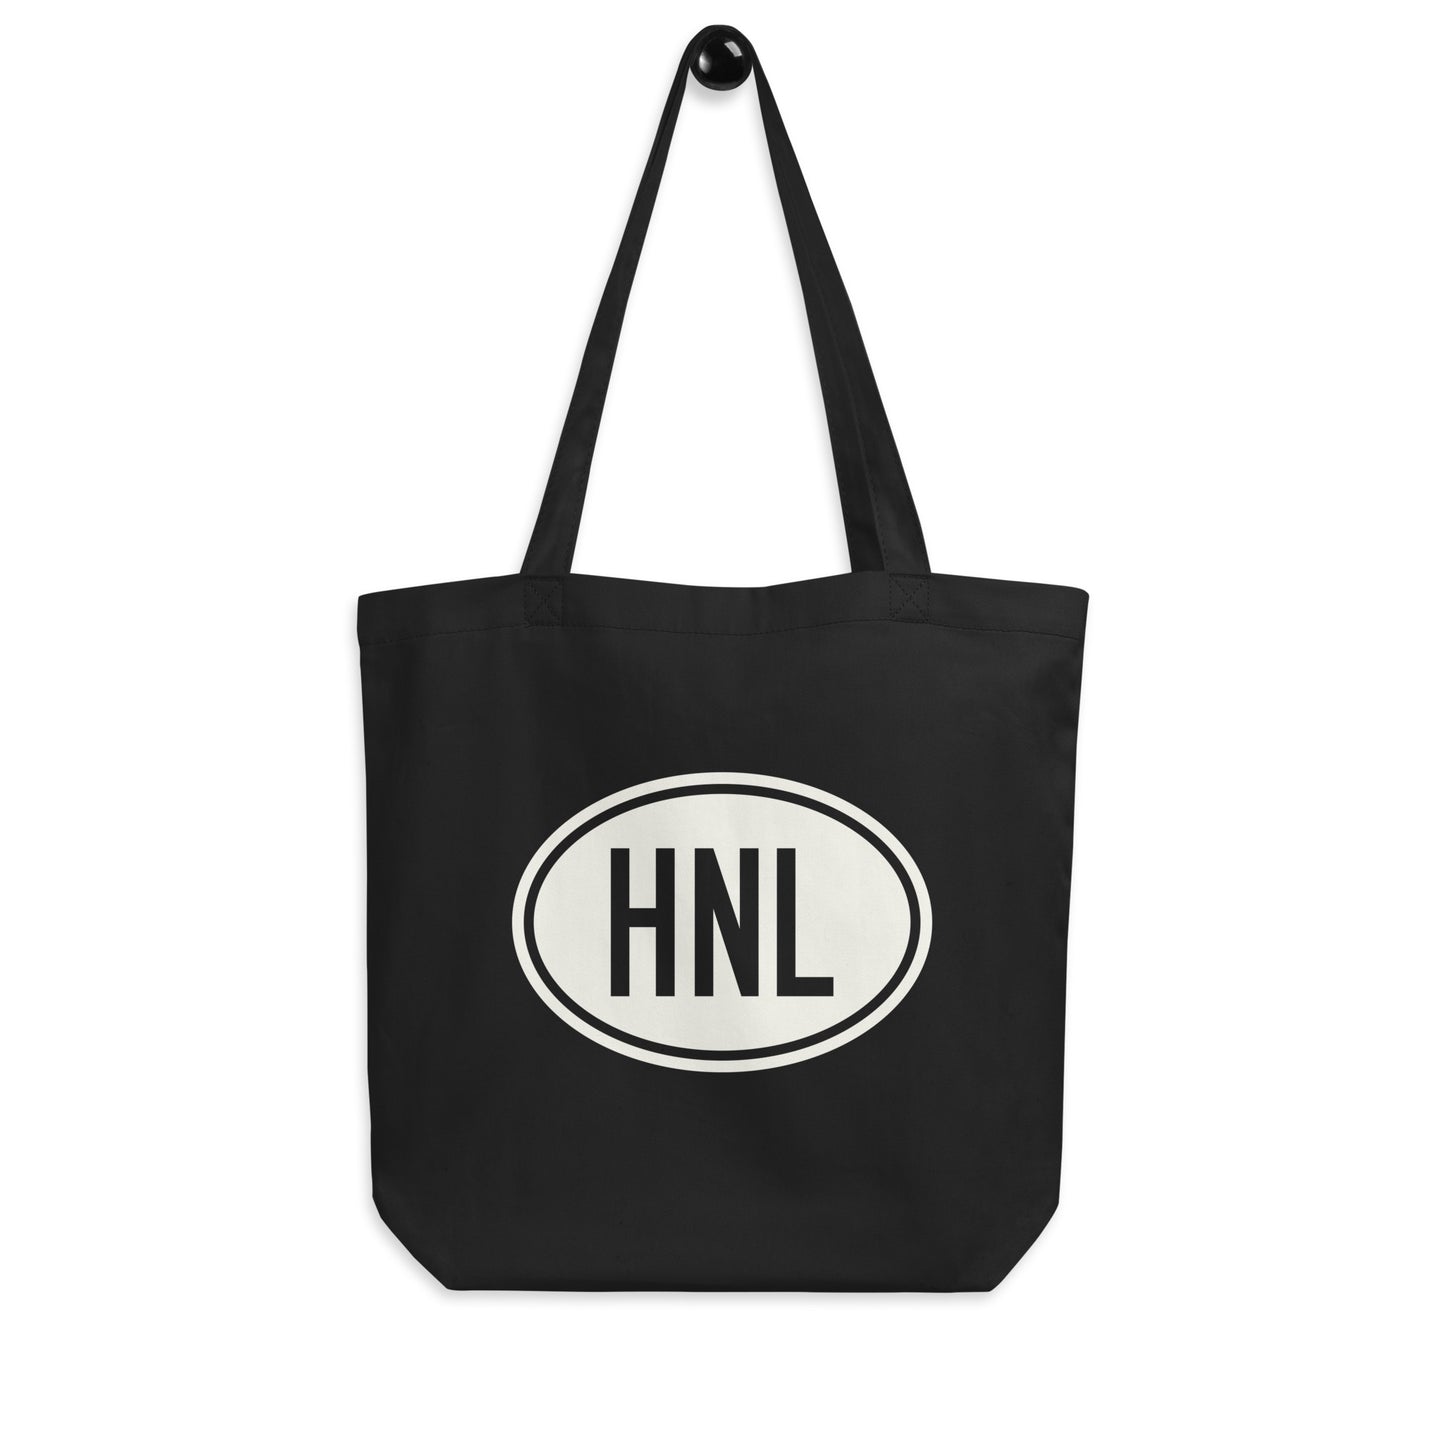 Unique Travel Gift Organic Tote - White Oval • HNL Honolulu • YHM Designs - Image 04